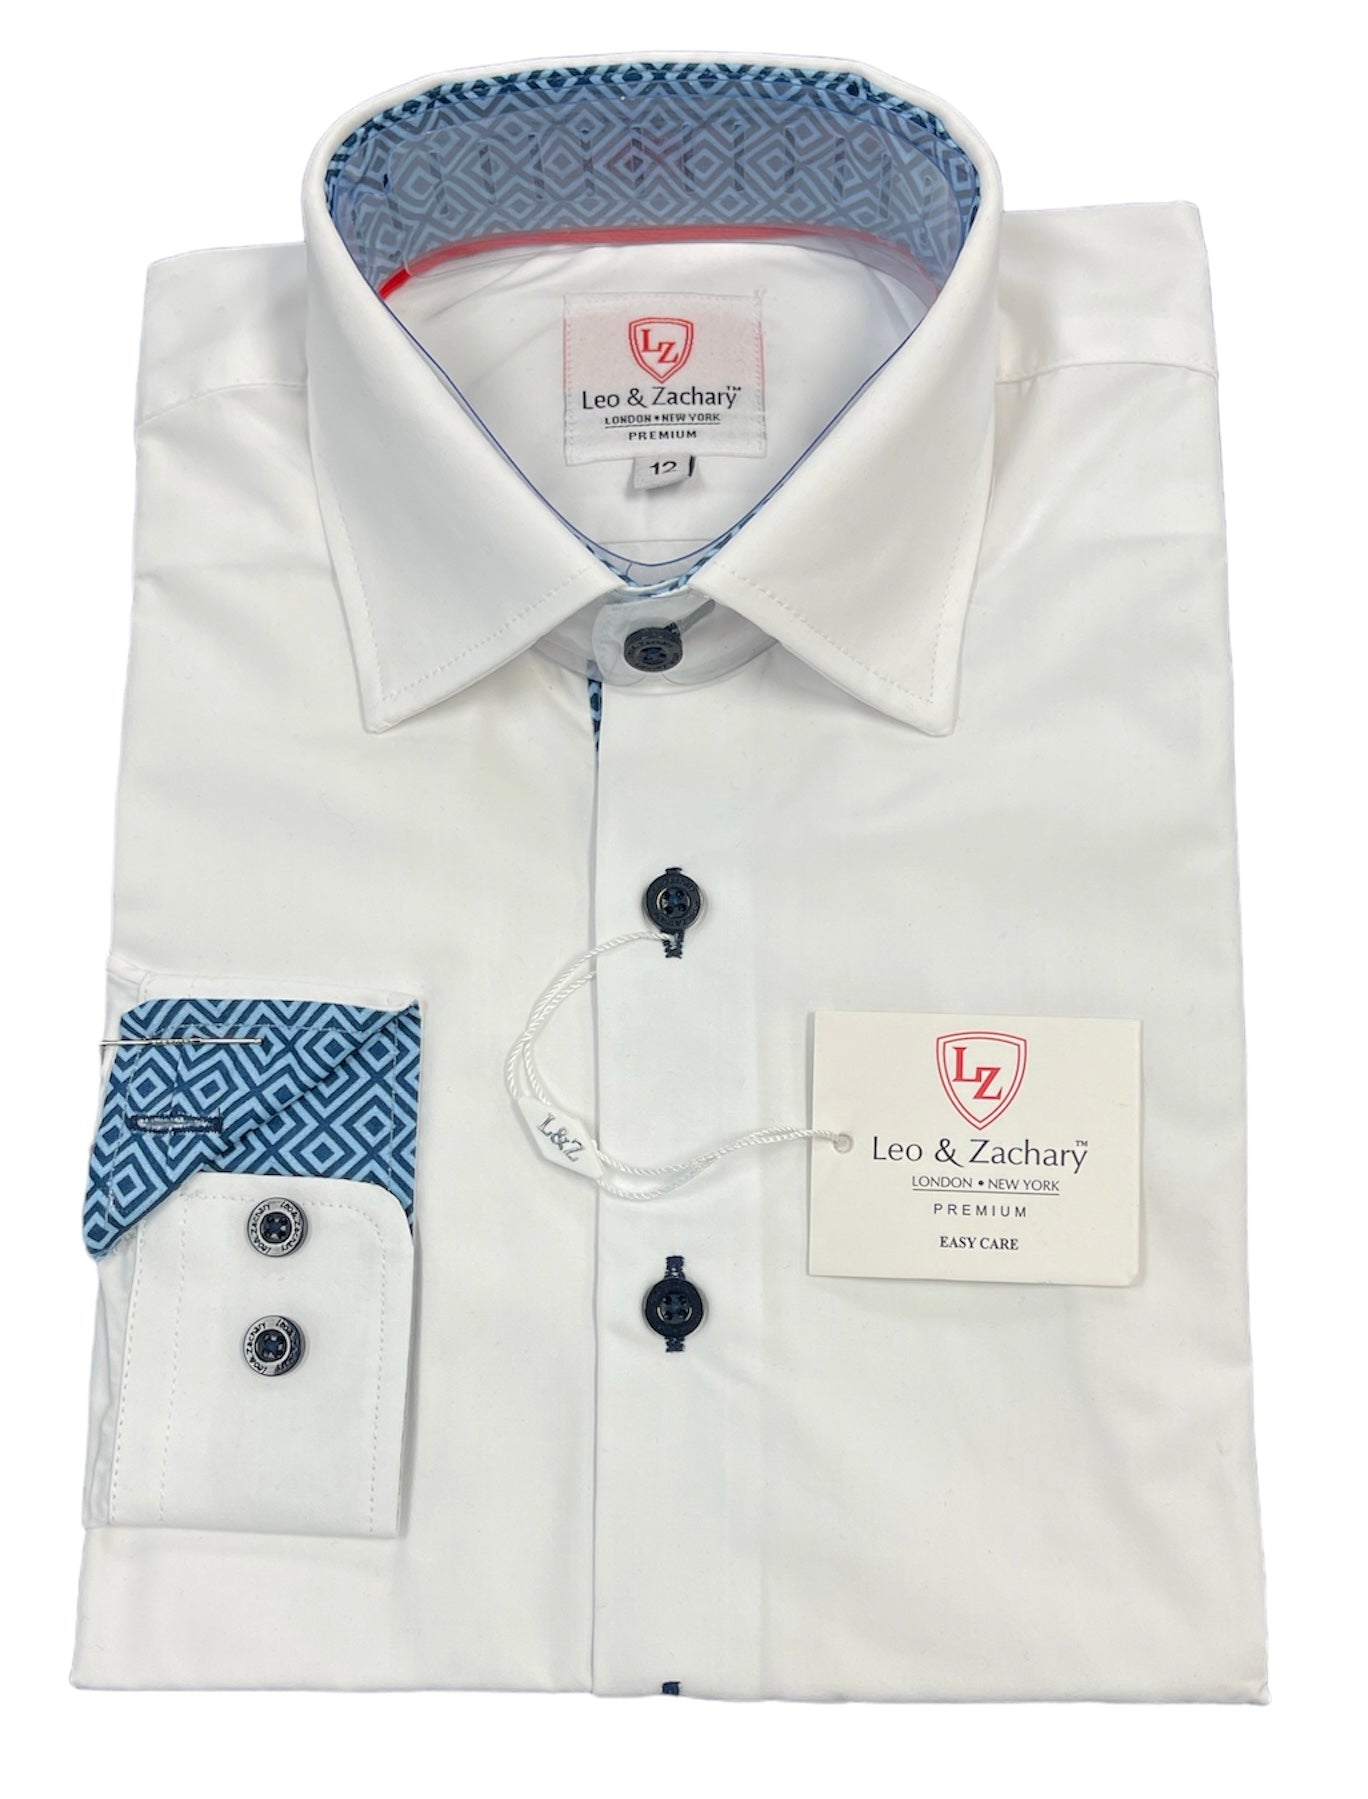 BOYS WRINKLE FREE BUTTON UP - W/NAVY